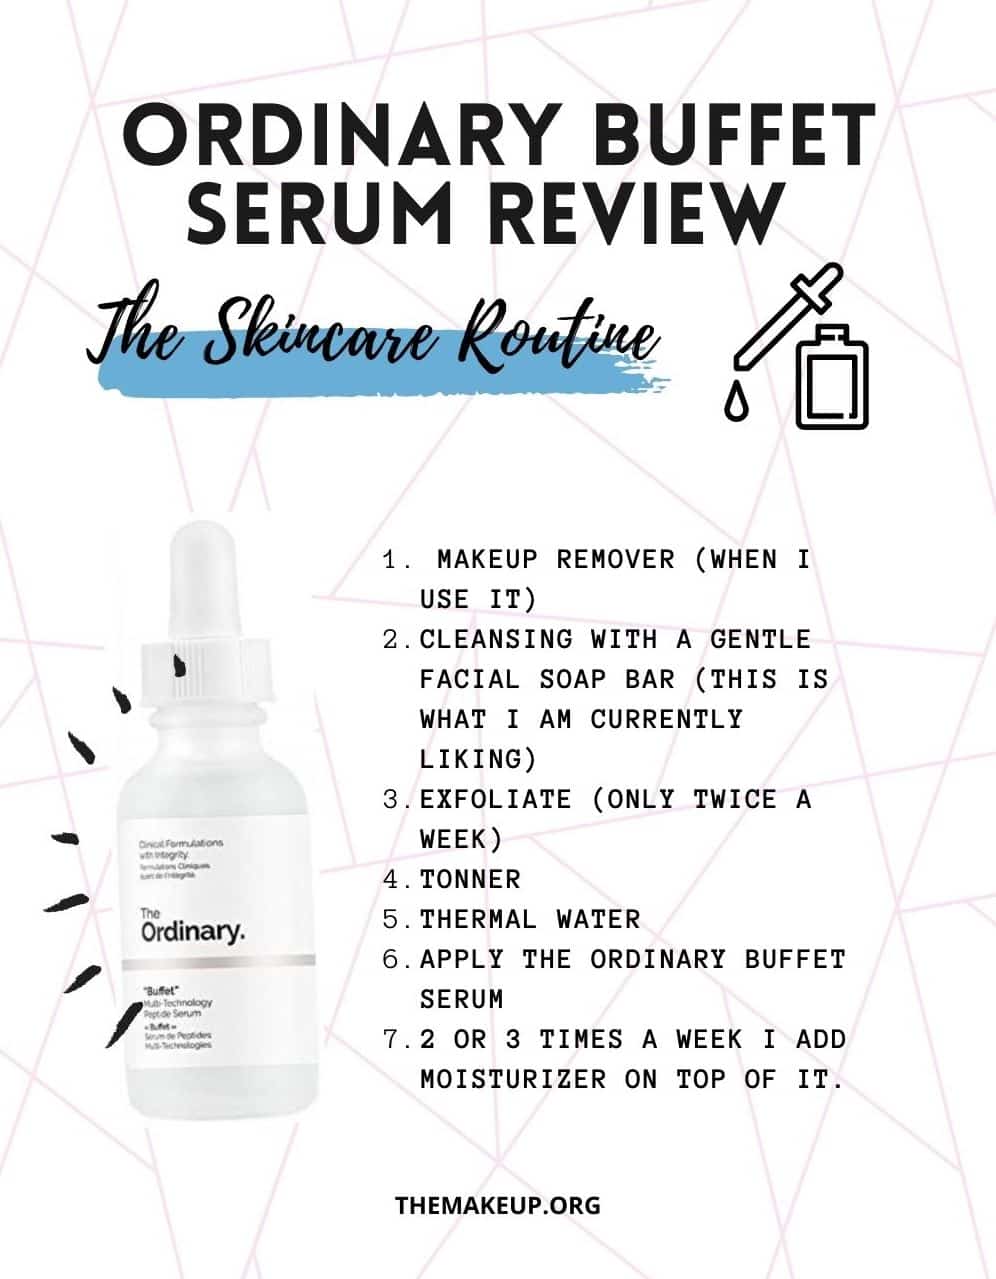 The Ordinary Buffet serum review